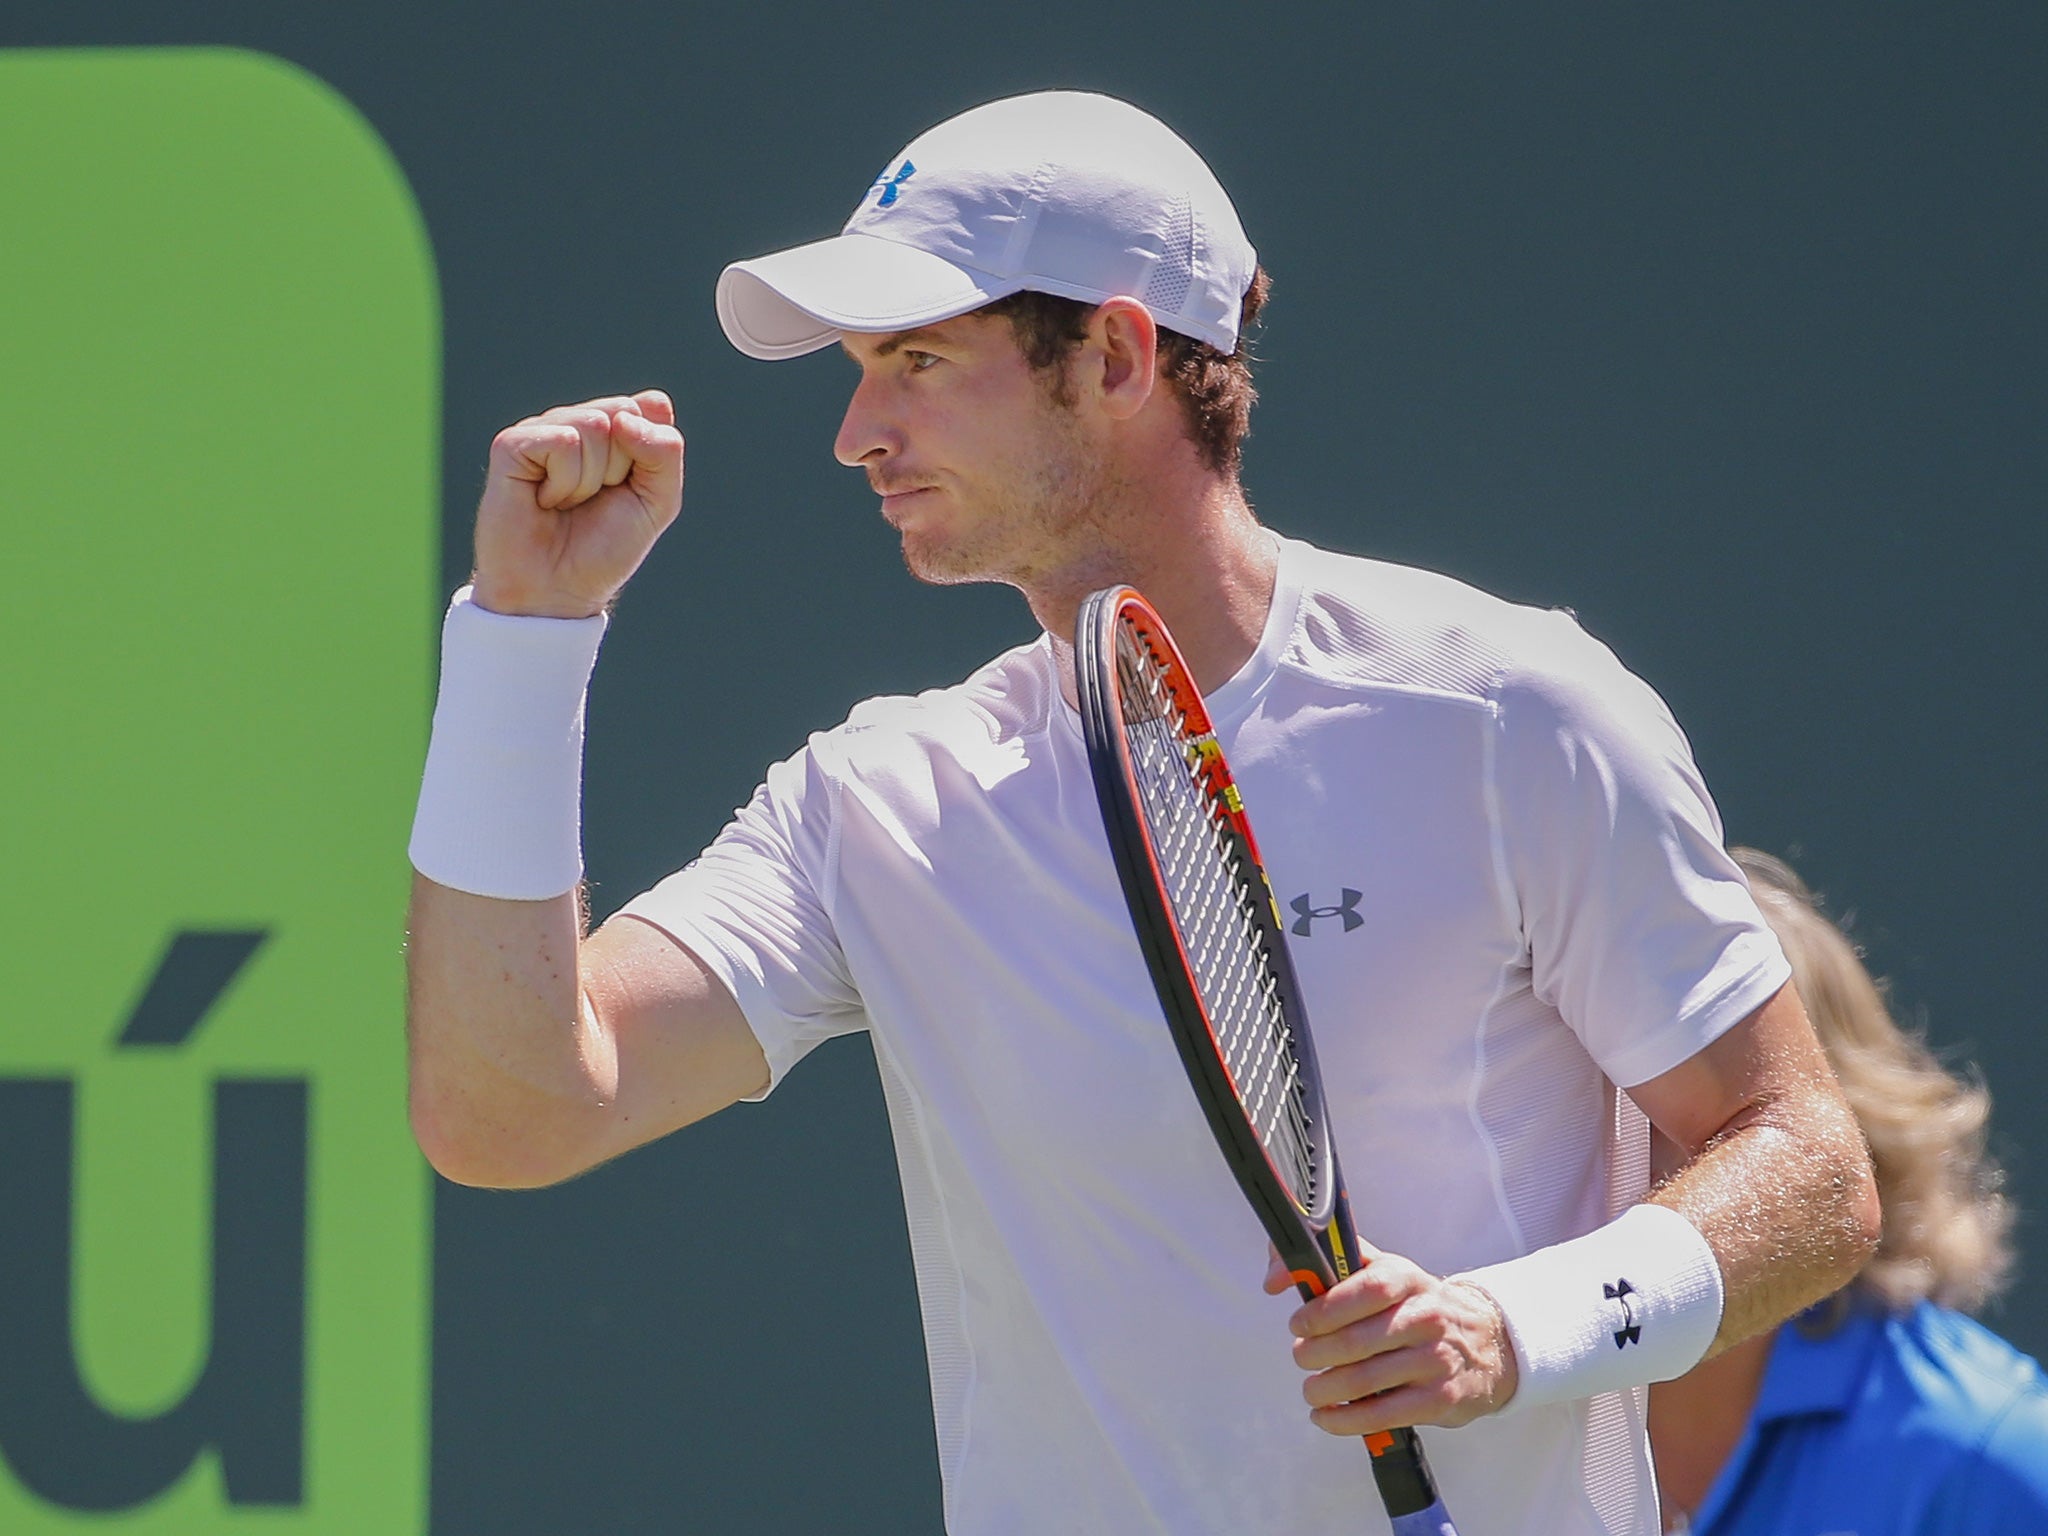 Andy Murray beat Tomas Berdych 6-4, 6-4 to reach the final of the Miami Masters